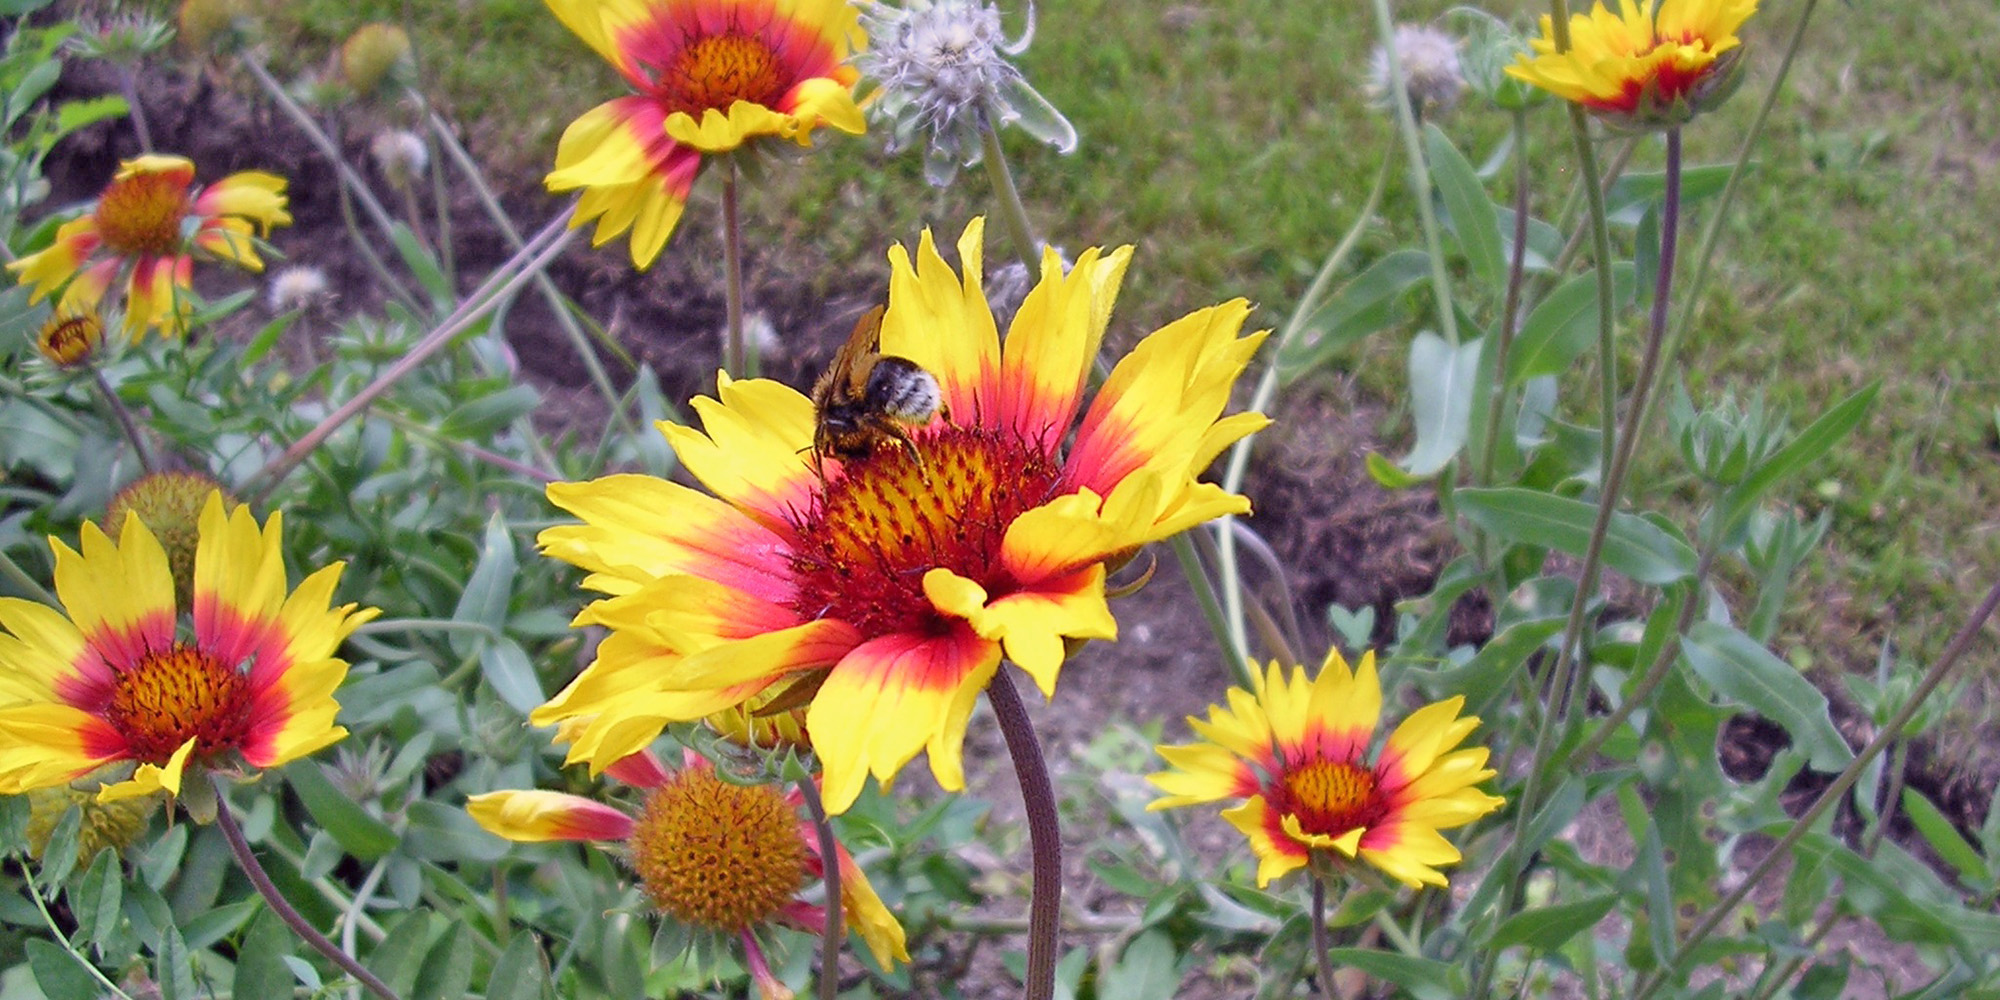 Bee lands on yellow and red flower